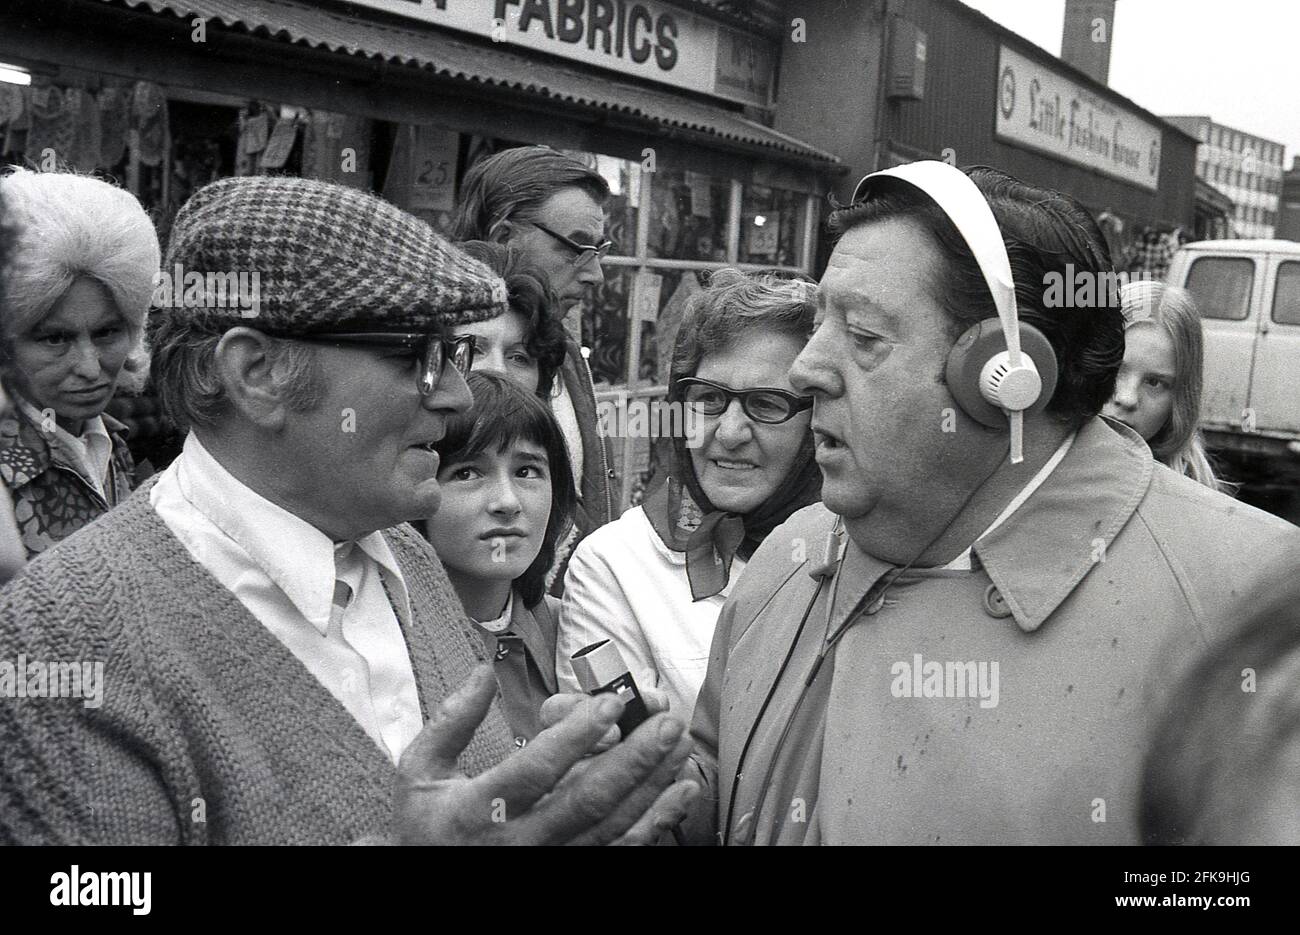 1970s, popular man of the people, radio presenter and reporter, Monty Modlyn talking to a local man wearing a flat cap surrounded by people in a South London market area, England, UK. Born into a Jewish family from Lambeth, Modlyn was known for his cockney accent and his broadcast forte was interviewing ordinary British people, a technique that became known as 'Vox Pop'. Addressing people with the words 'Ullo darlin', his east end working class persona saw him have conversations about anything and everything during a long and distinguished broadcasting career. Stock Photo